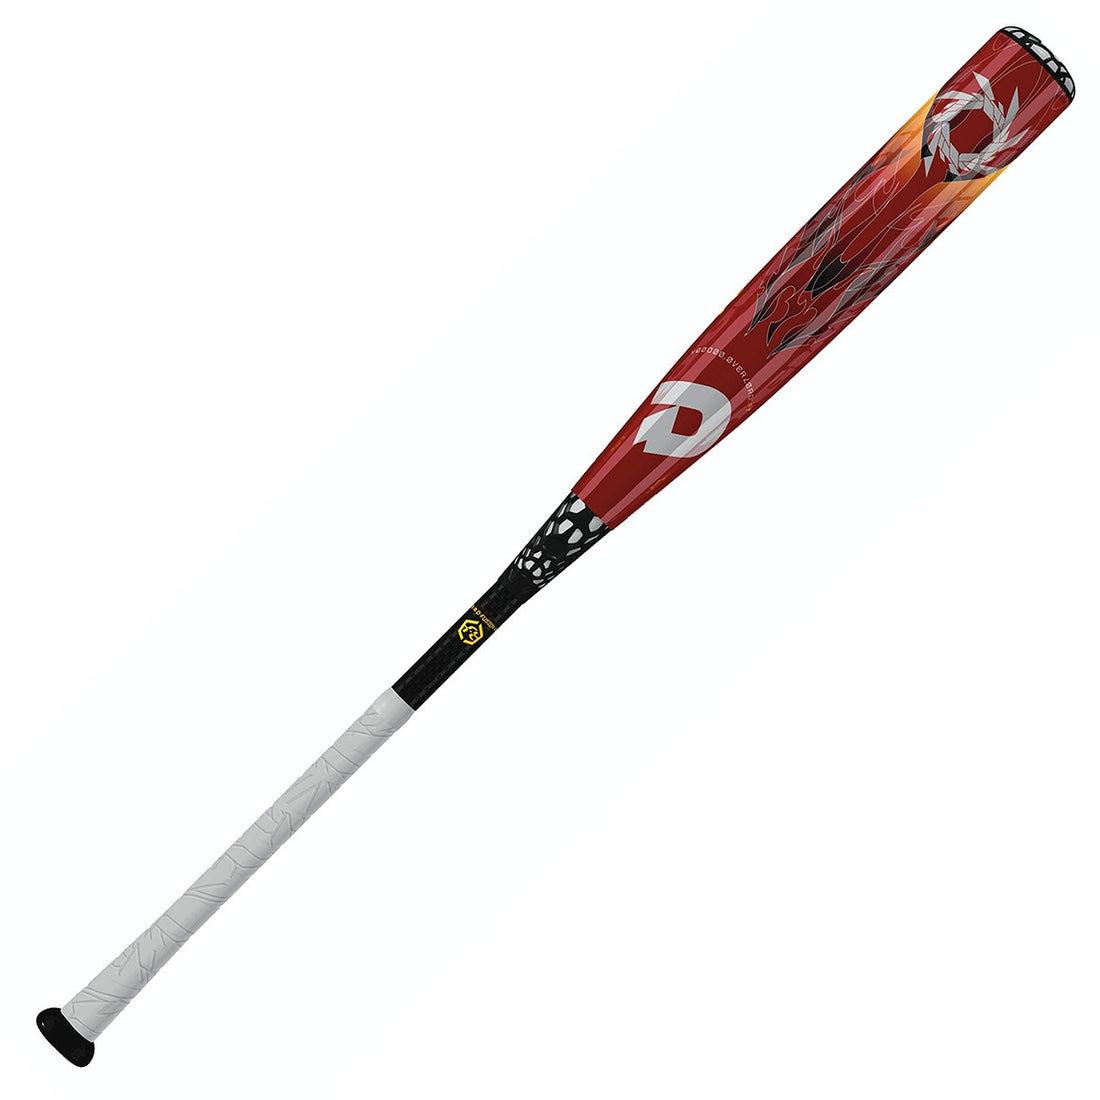 Youth bat for young or beginning players